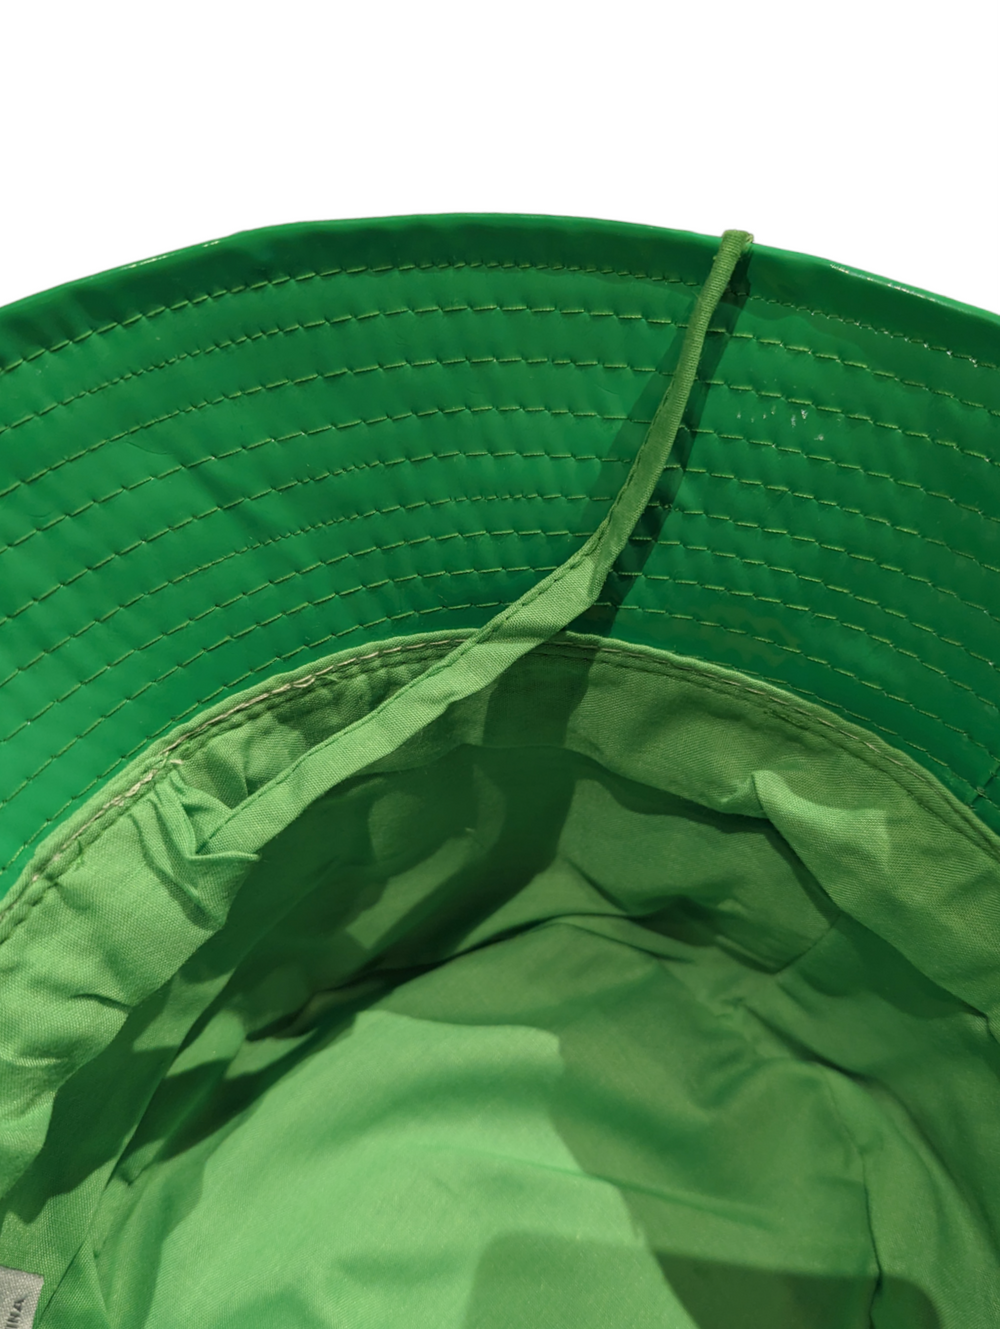 the underside view of the bucket hat showing a lighter green lining and an adjustable string